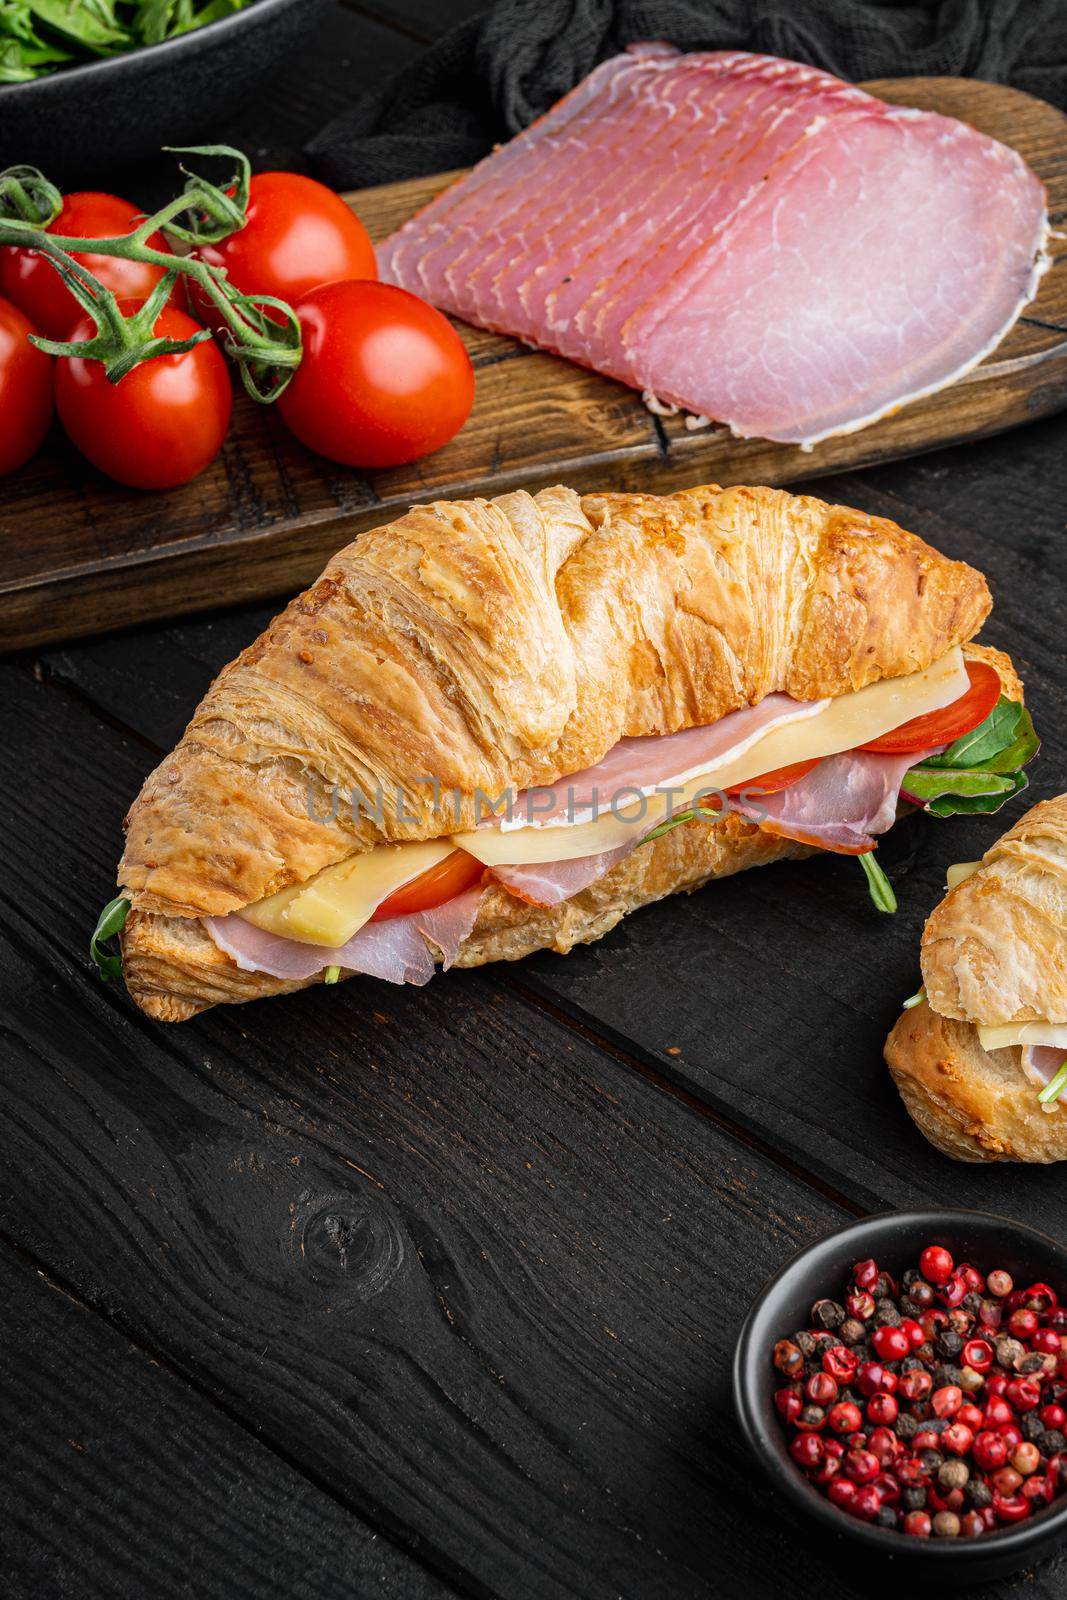 Fresh croissant or sandwich with salad, ham, jamon, prosciutto, with herbs and ingredients, on black wooden table background, with copy space for text by Ilianesolenyi